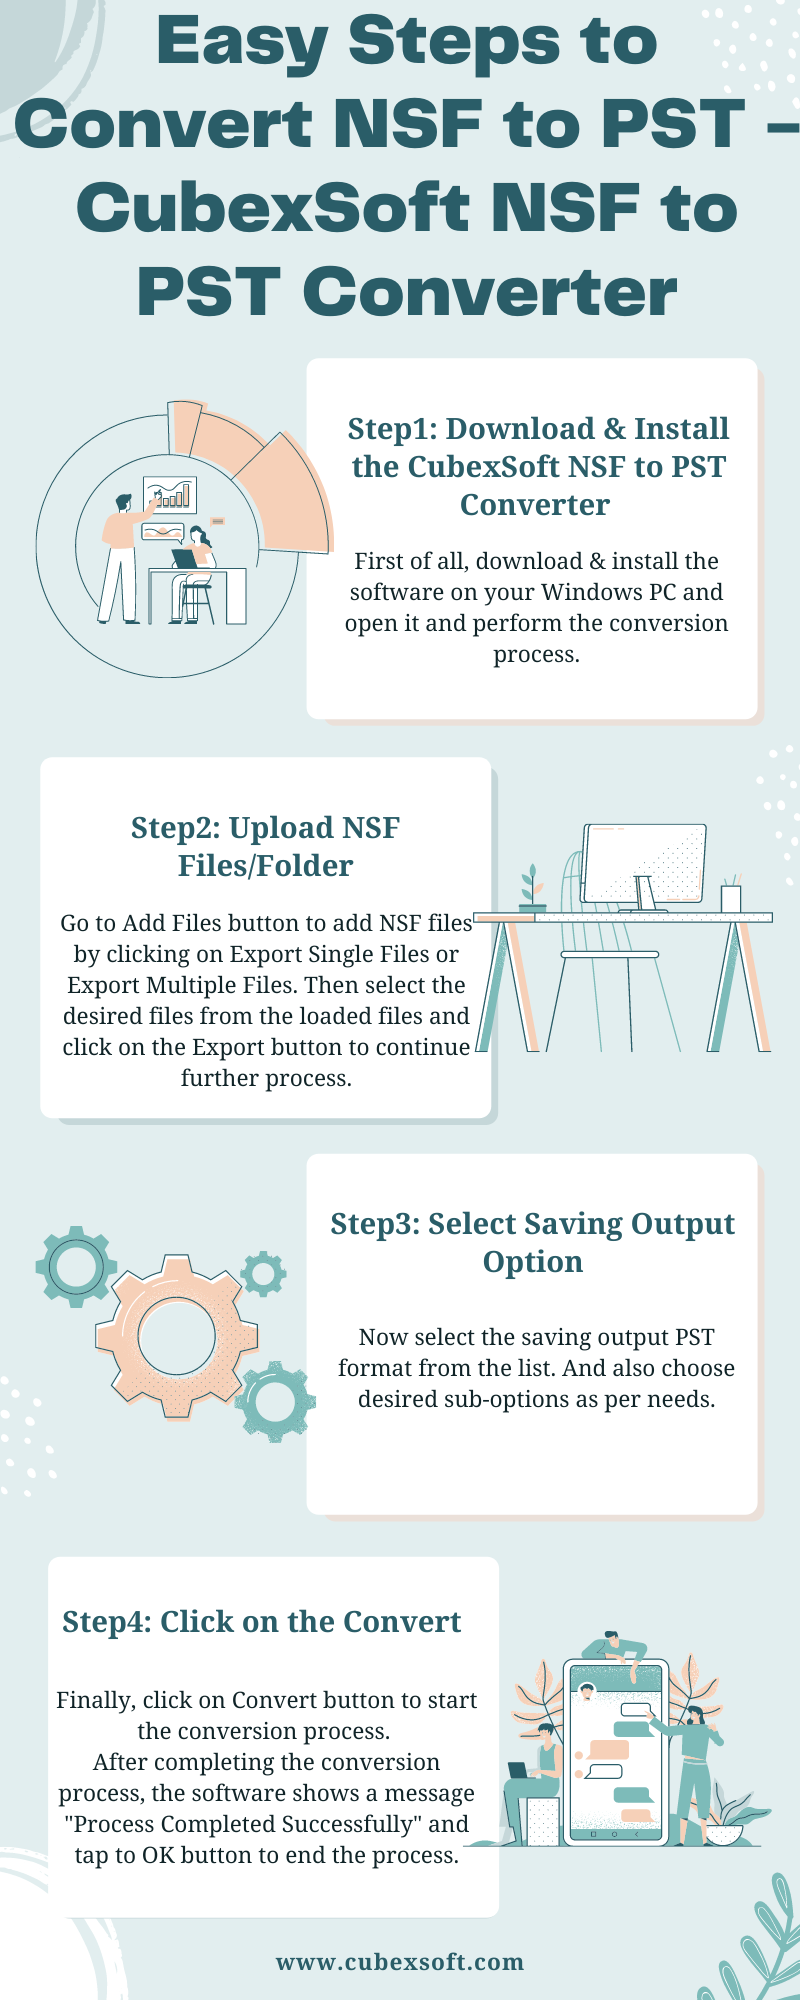 Easy Steps to Convert NSF to PST Infographic